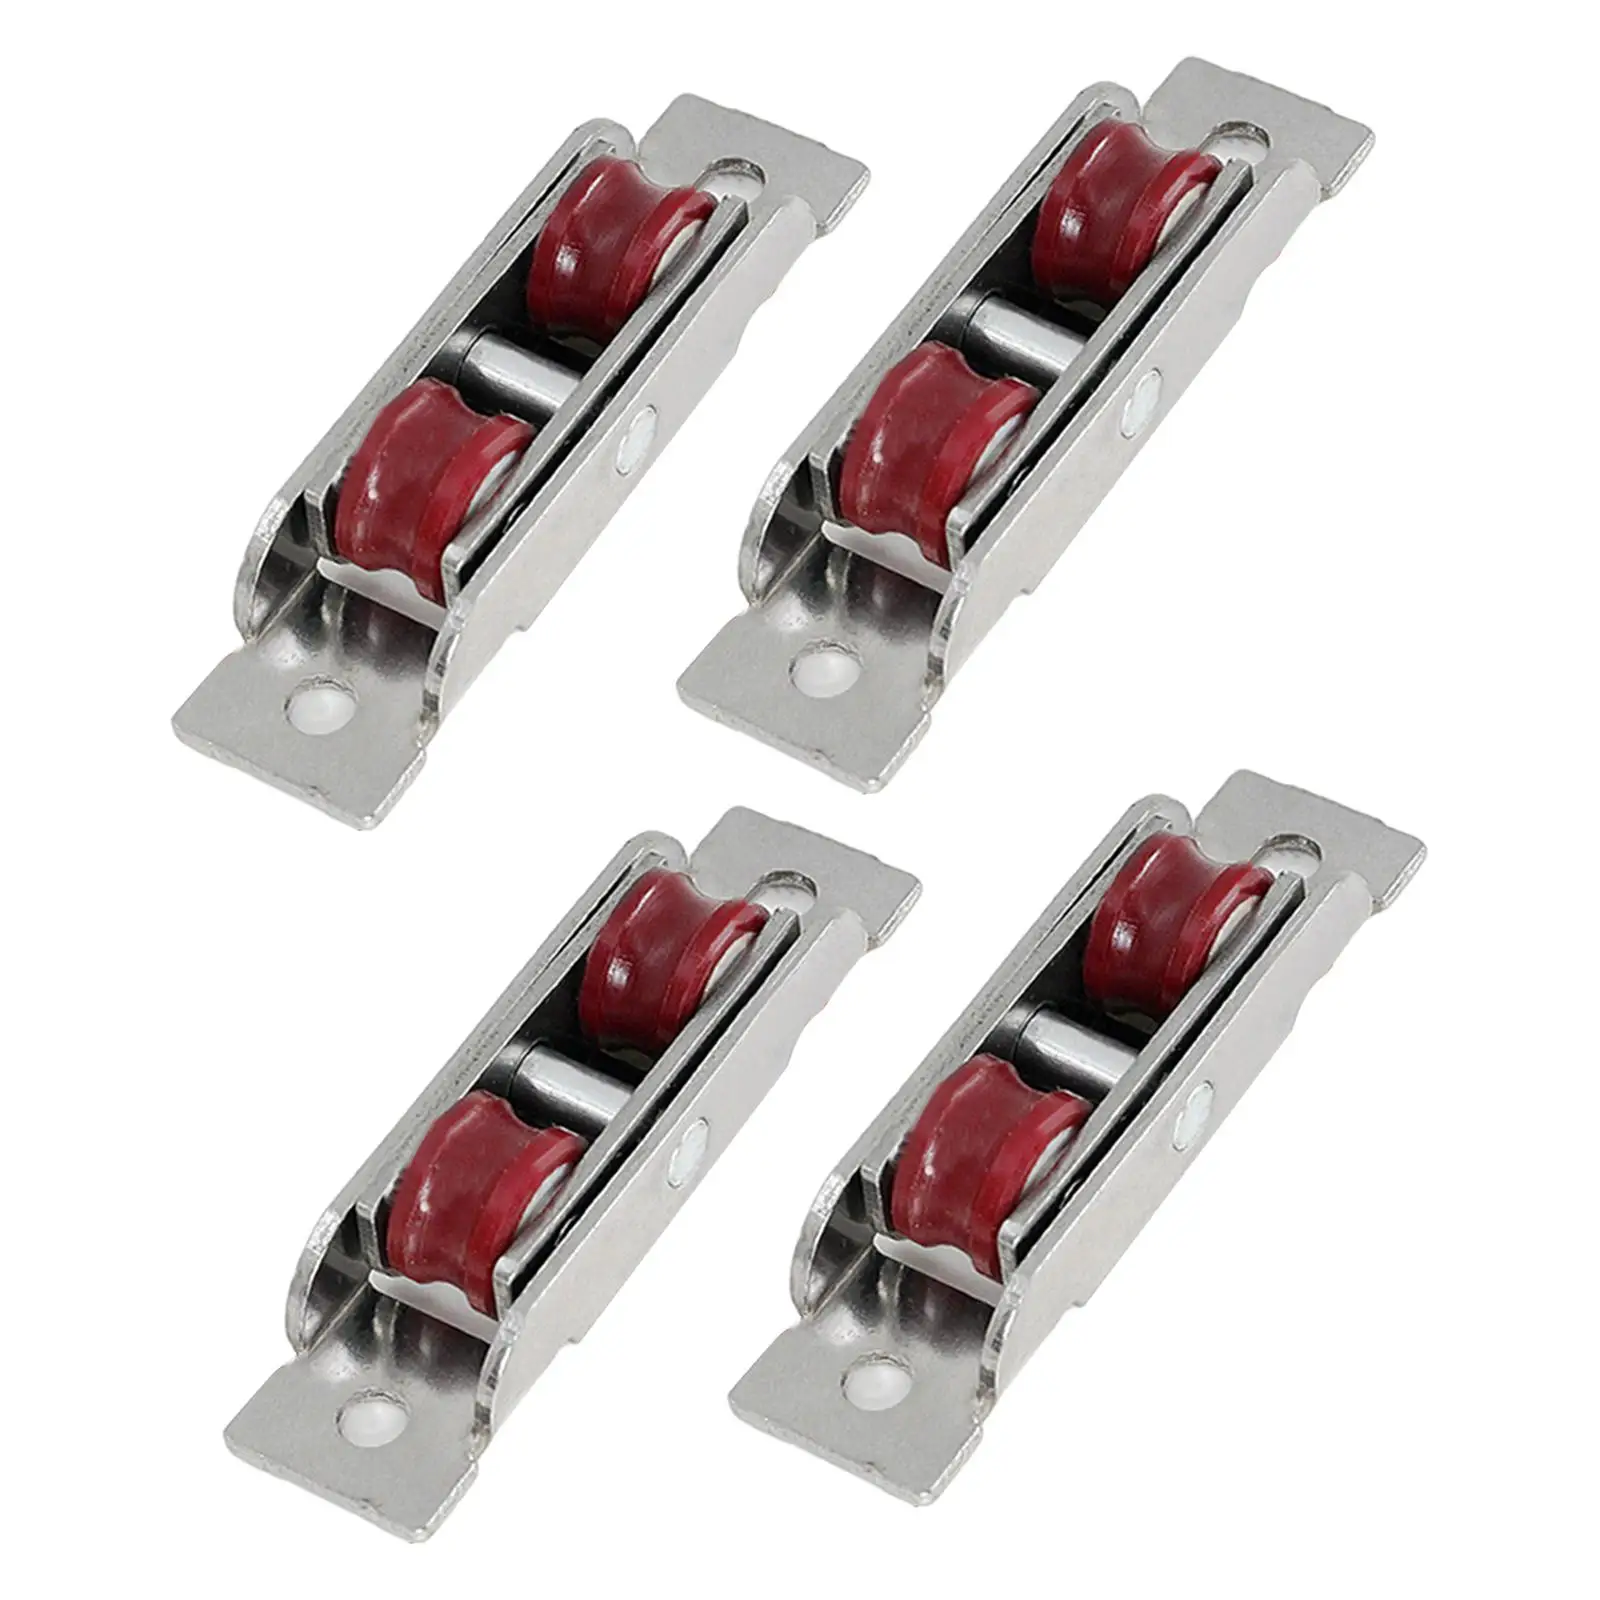 4Pcs Sliding Door Pulley Stainless Steel Window Hardware Nylon Sliding Rollers Silent Nylon Pulley Fittings for Kitchen Home